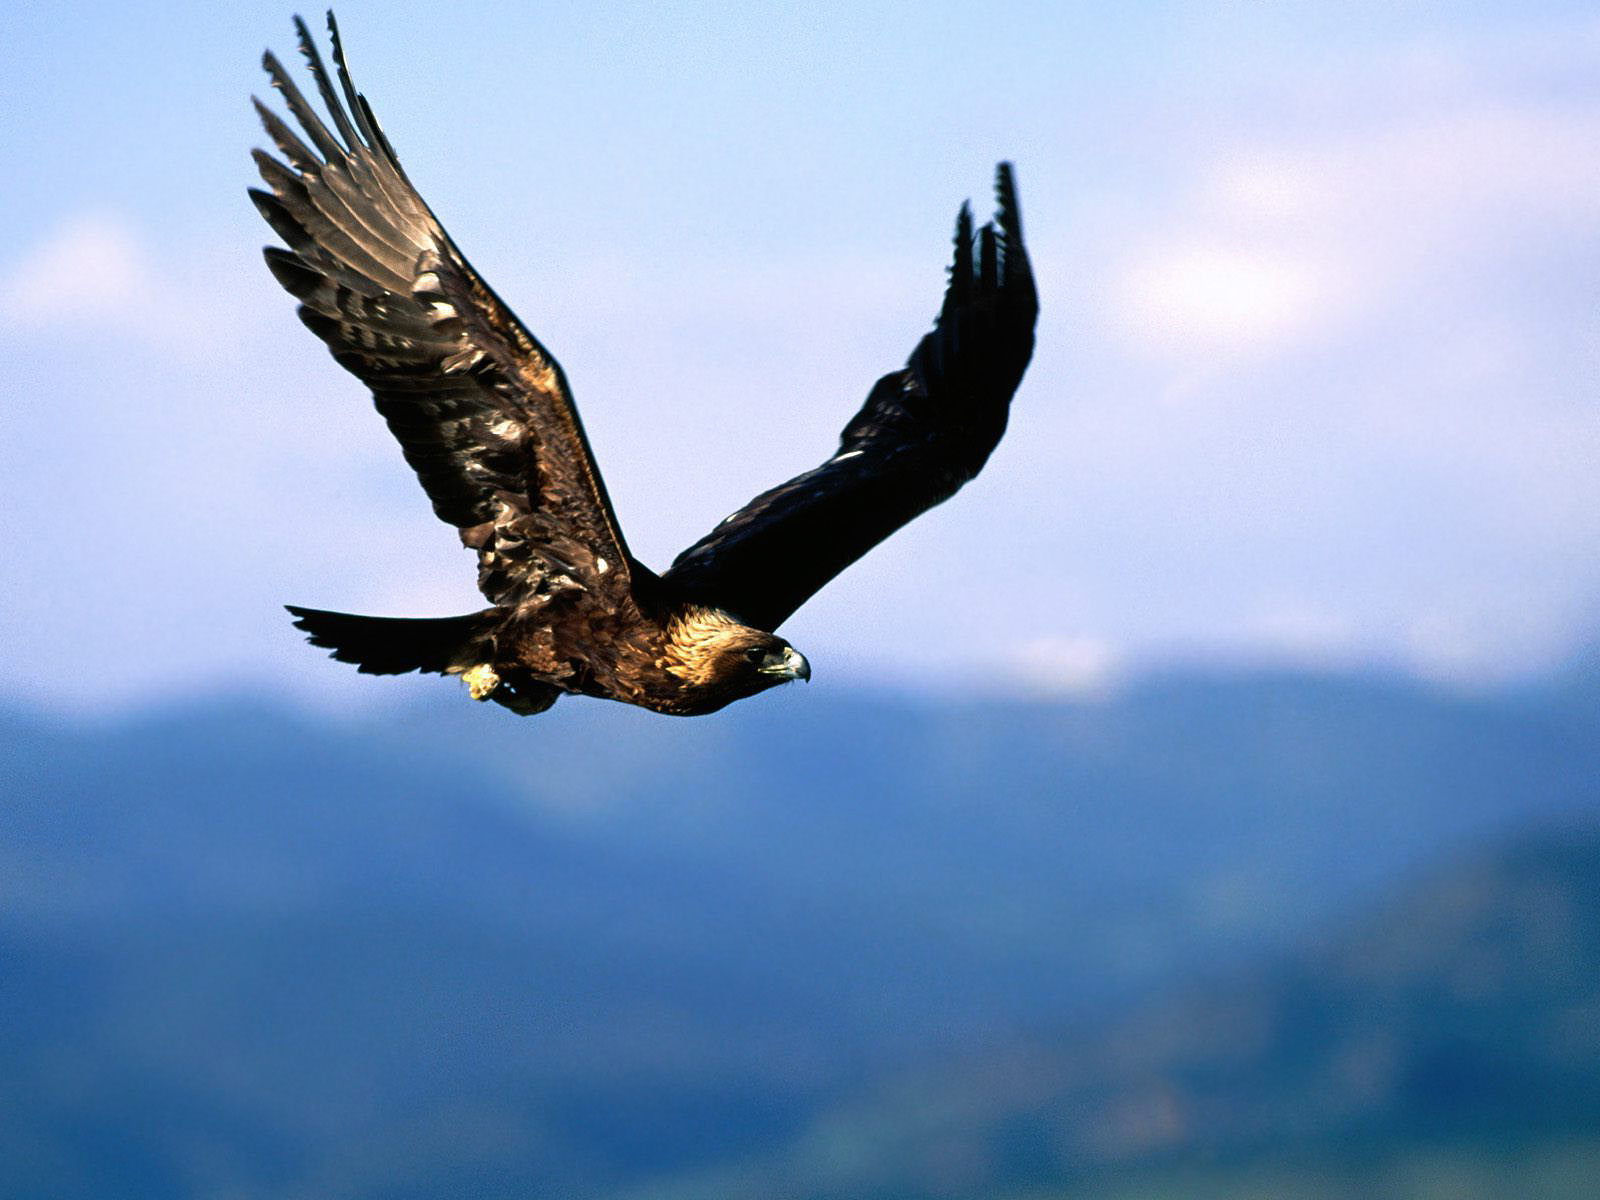 Hd Images Of An Eagle Download